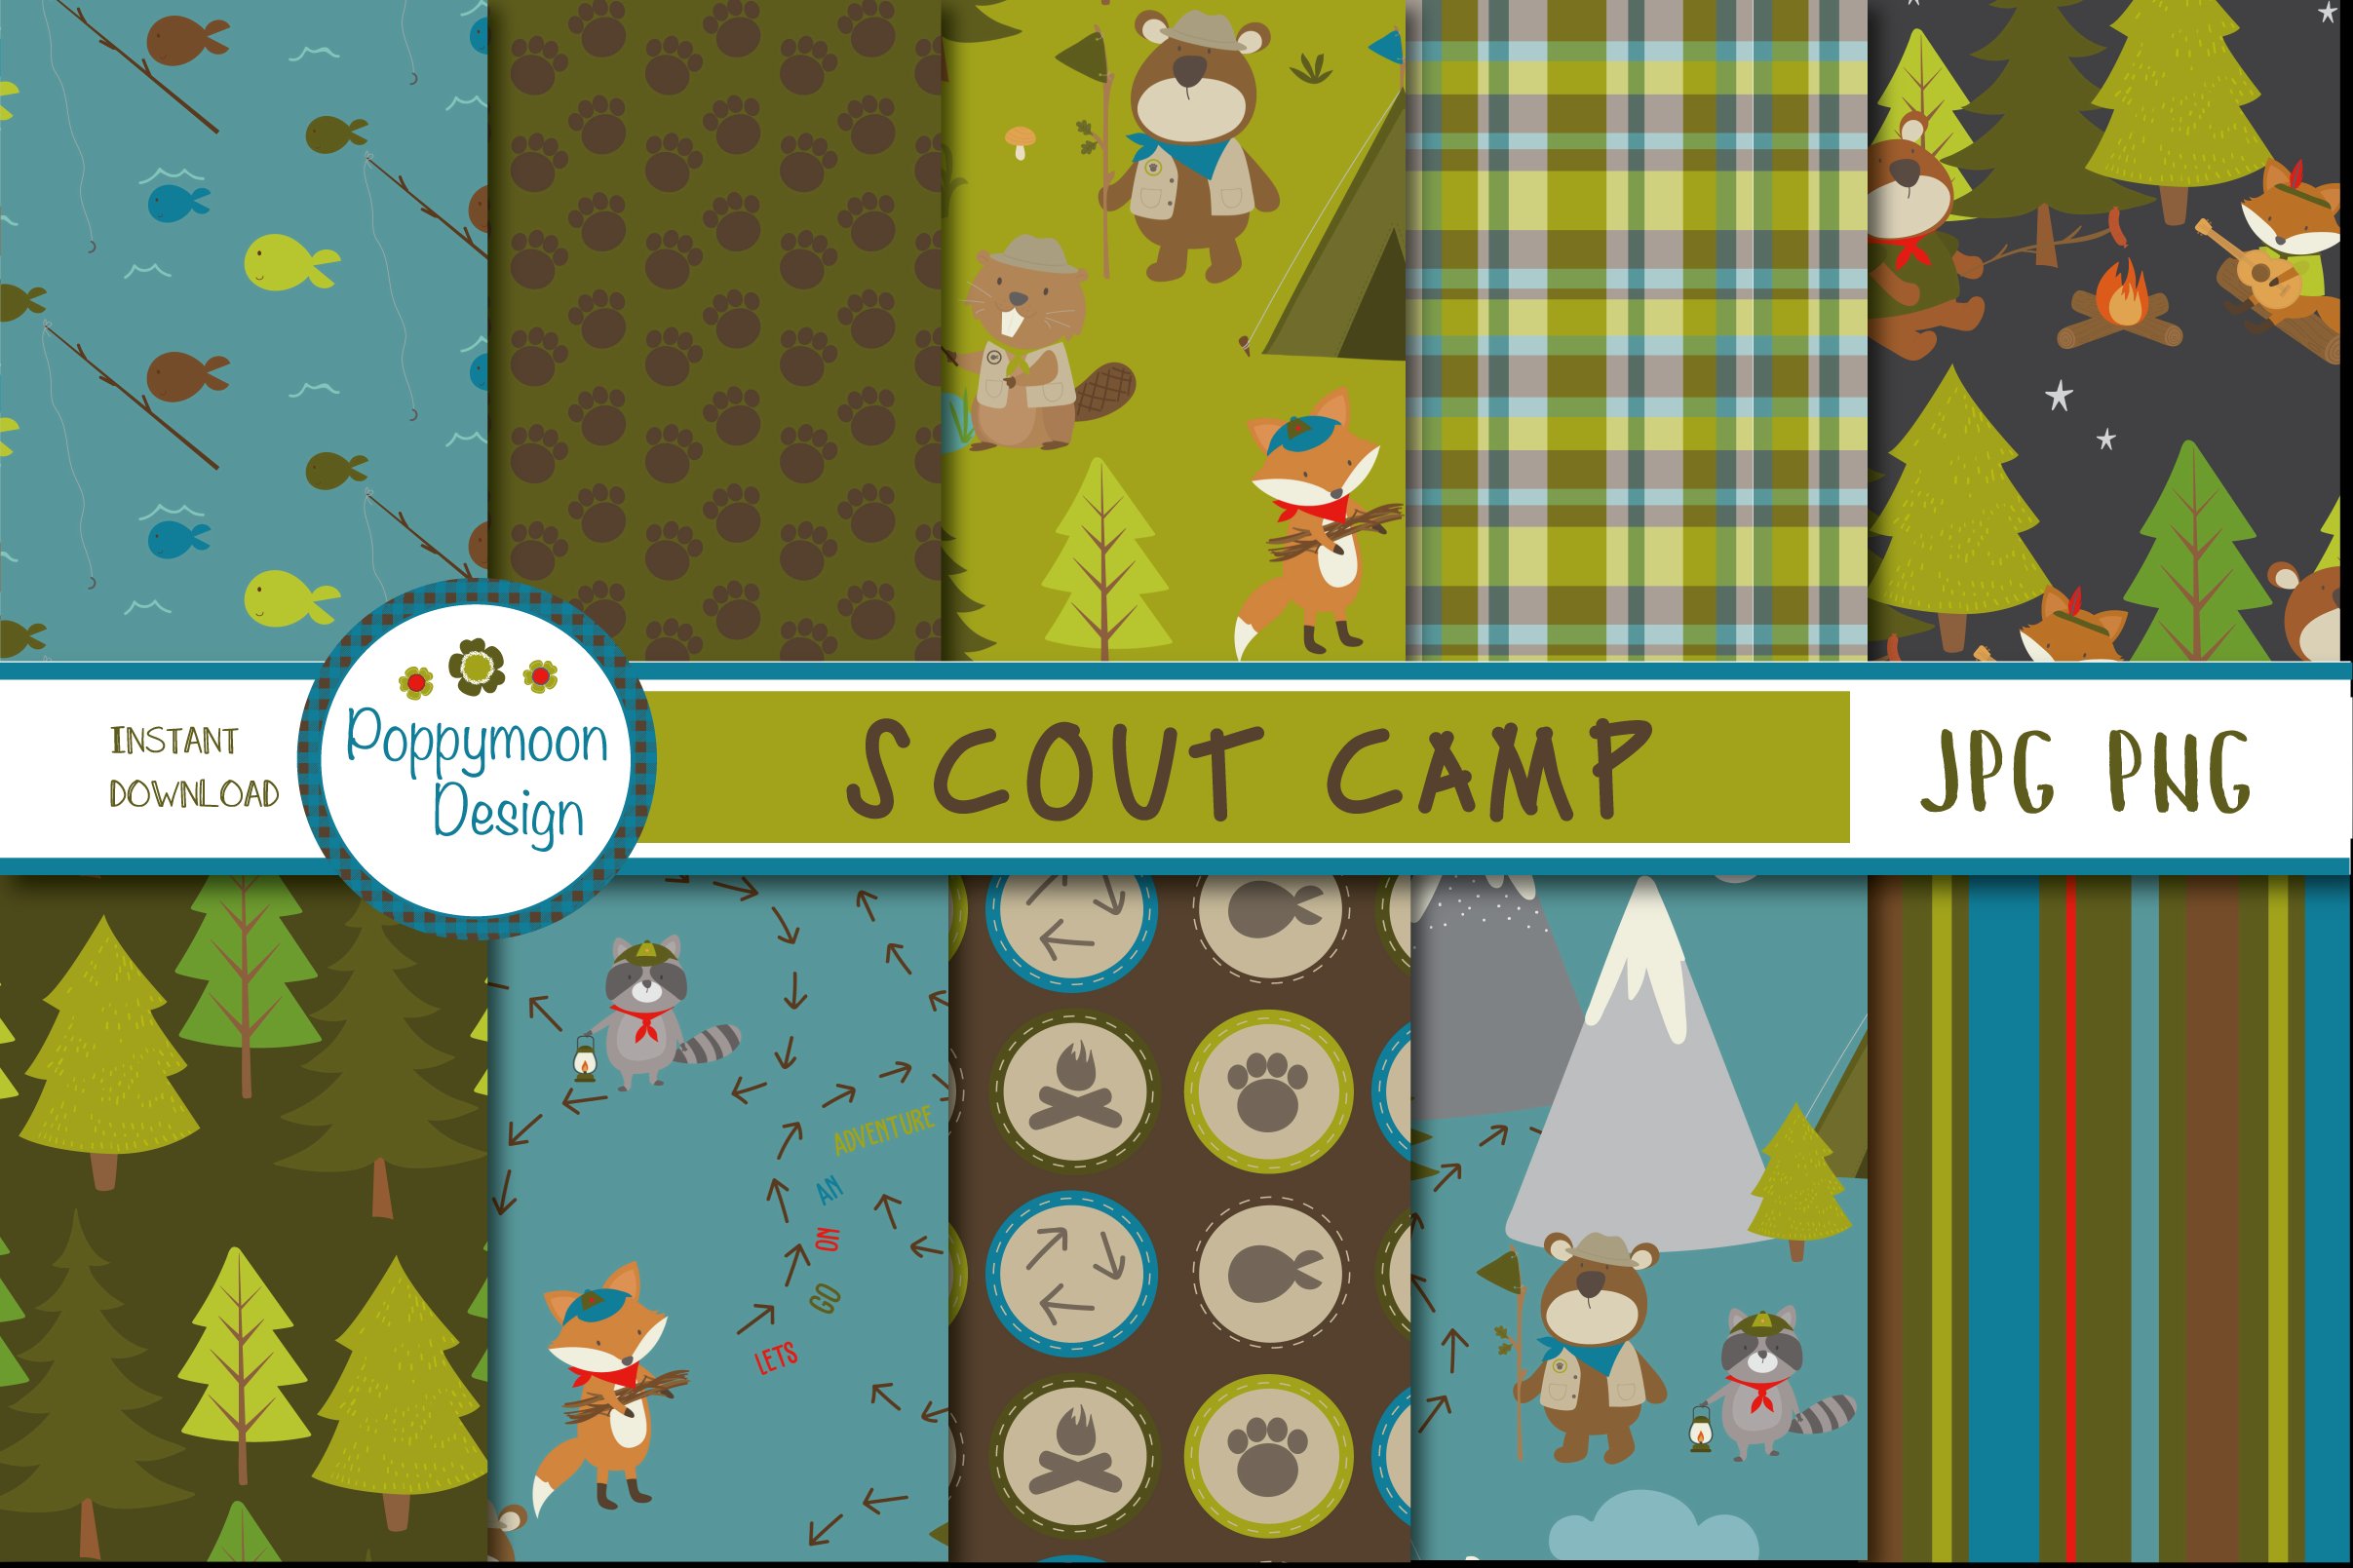 Scout Camp Paper cover image.